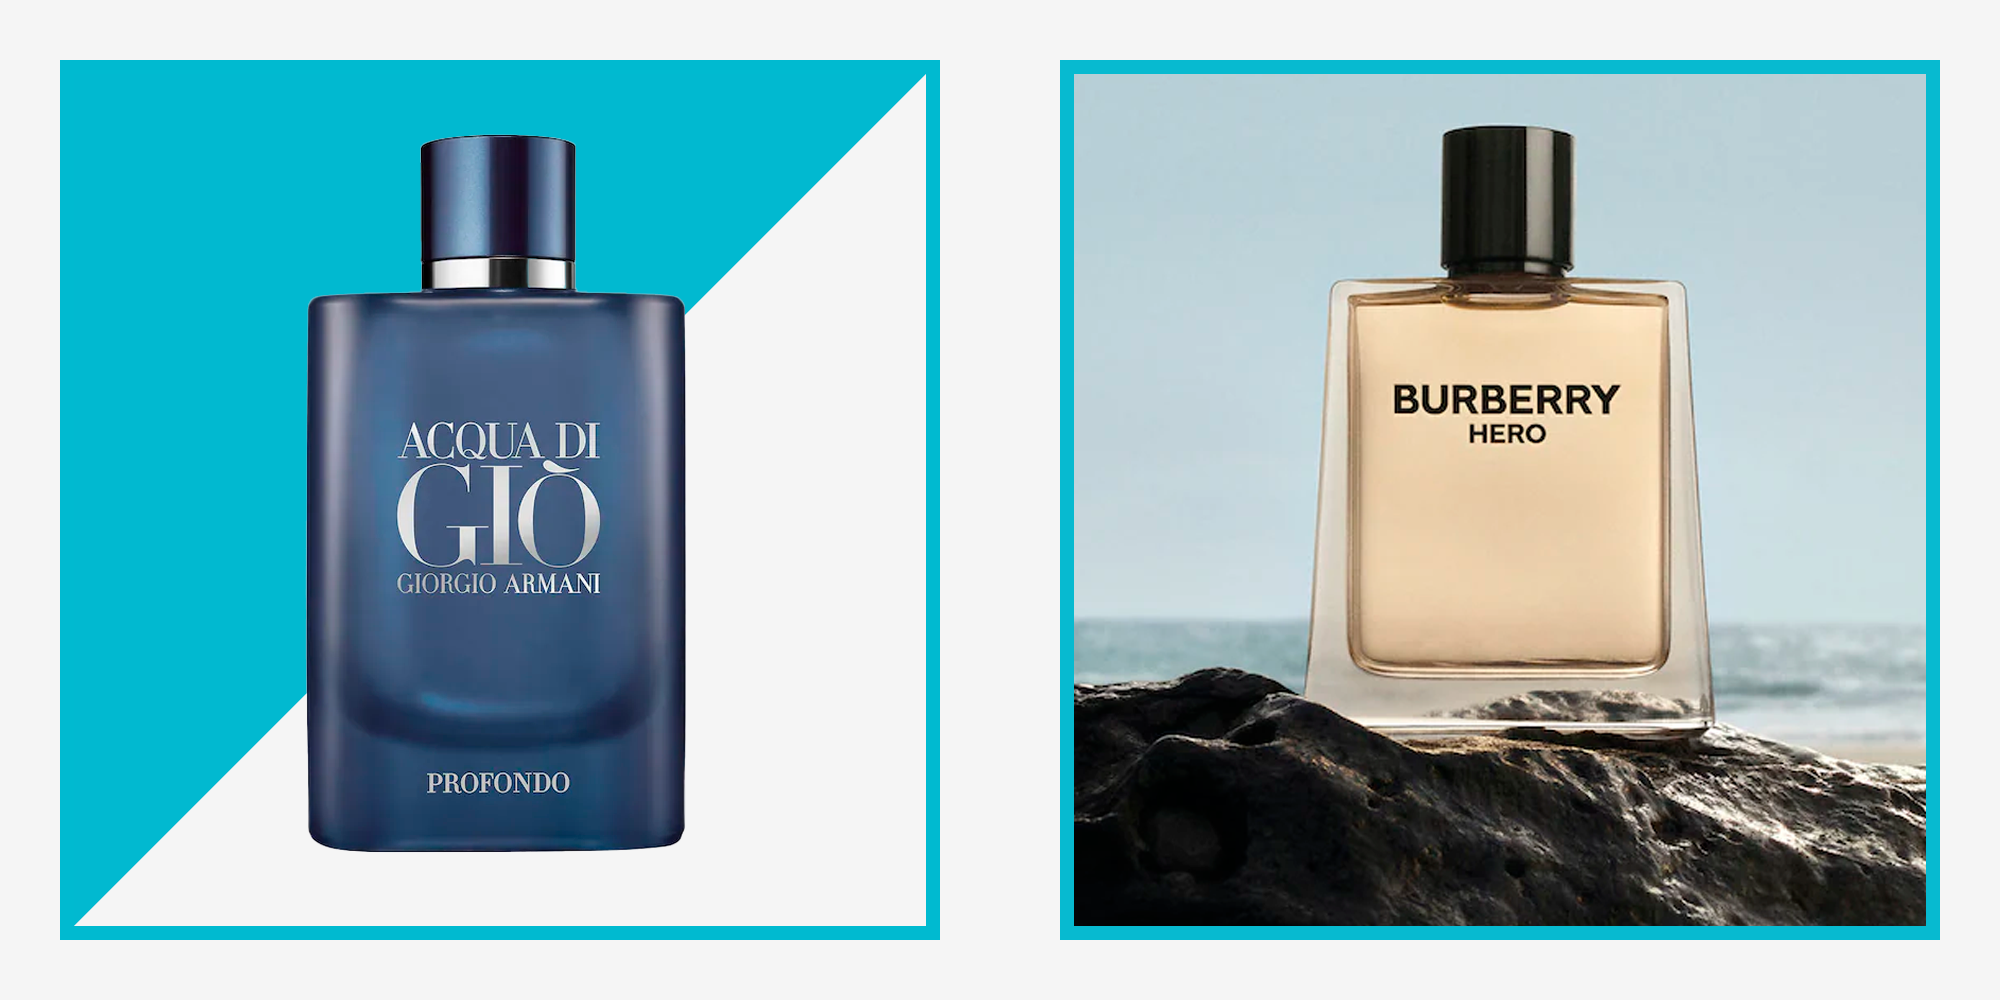 The 15 Best Long Lasting Colognes for Men in 2023, According to